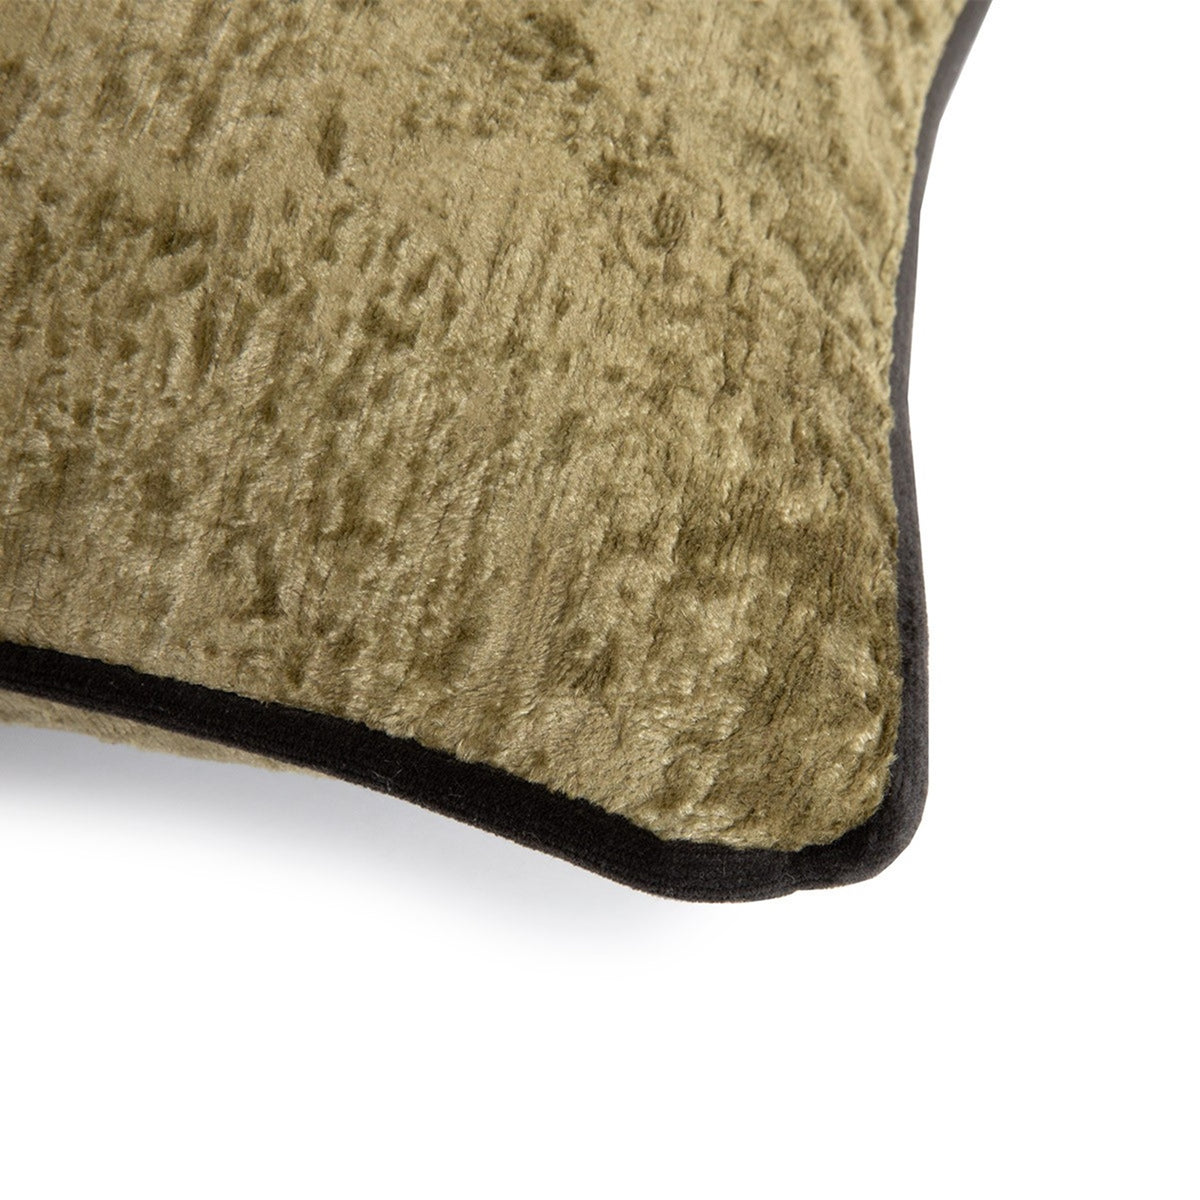 Close Up Image of Yves Delorme Iosis Boromee Decorative Pillow in Jungle Color